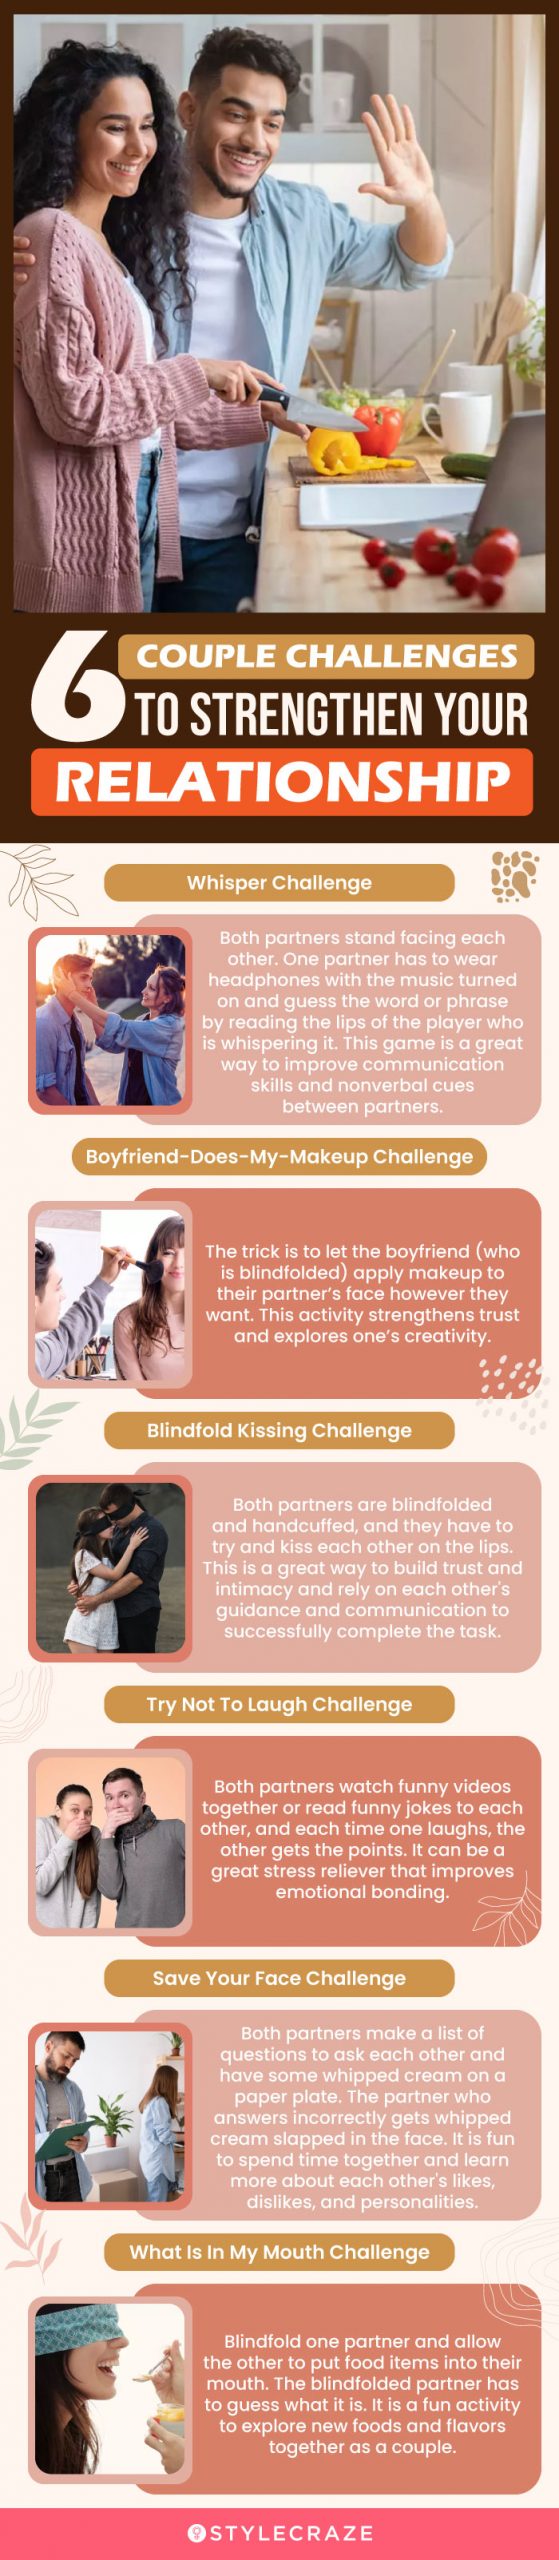 6 couple challenges to strengthen your relationship (infographic)